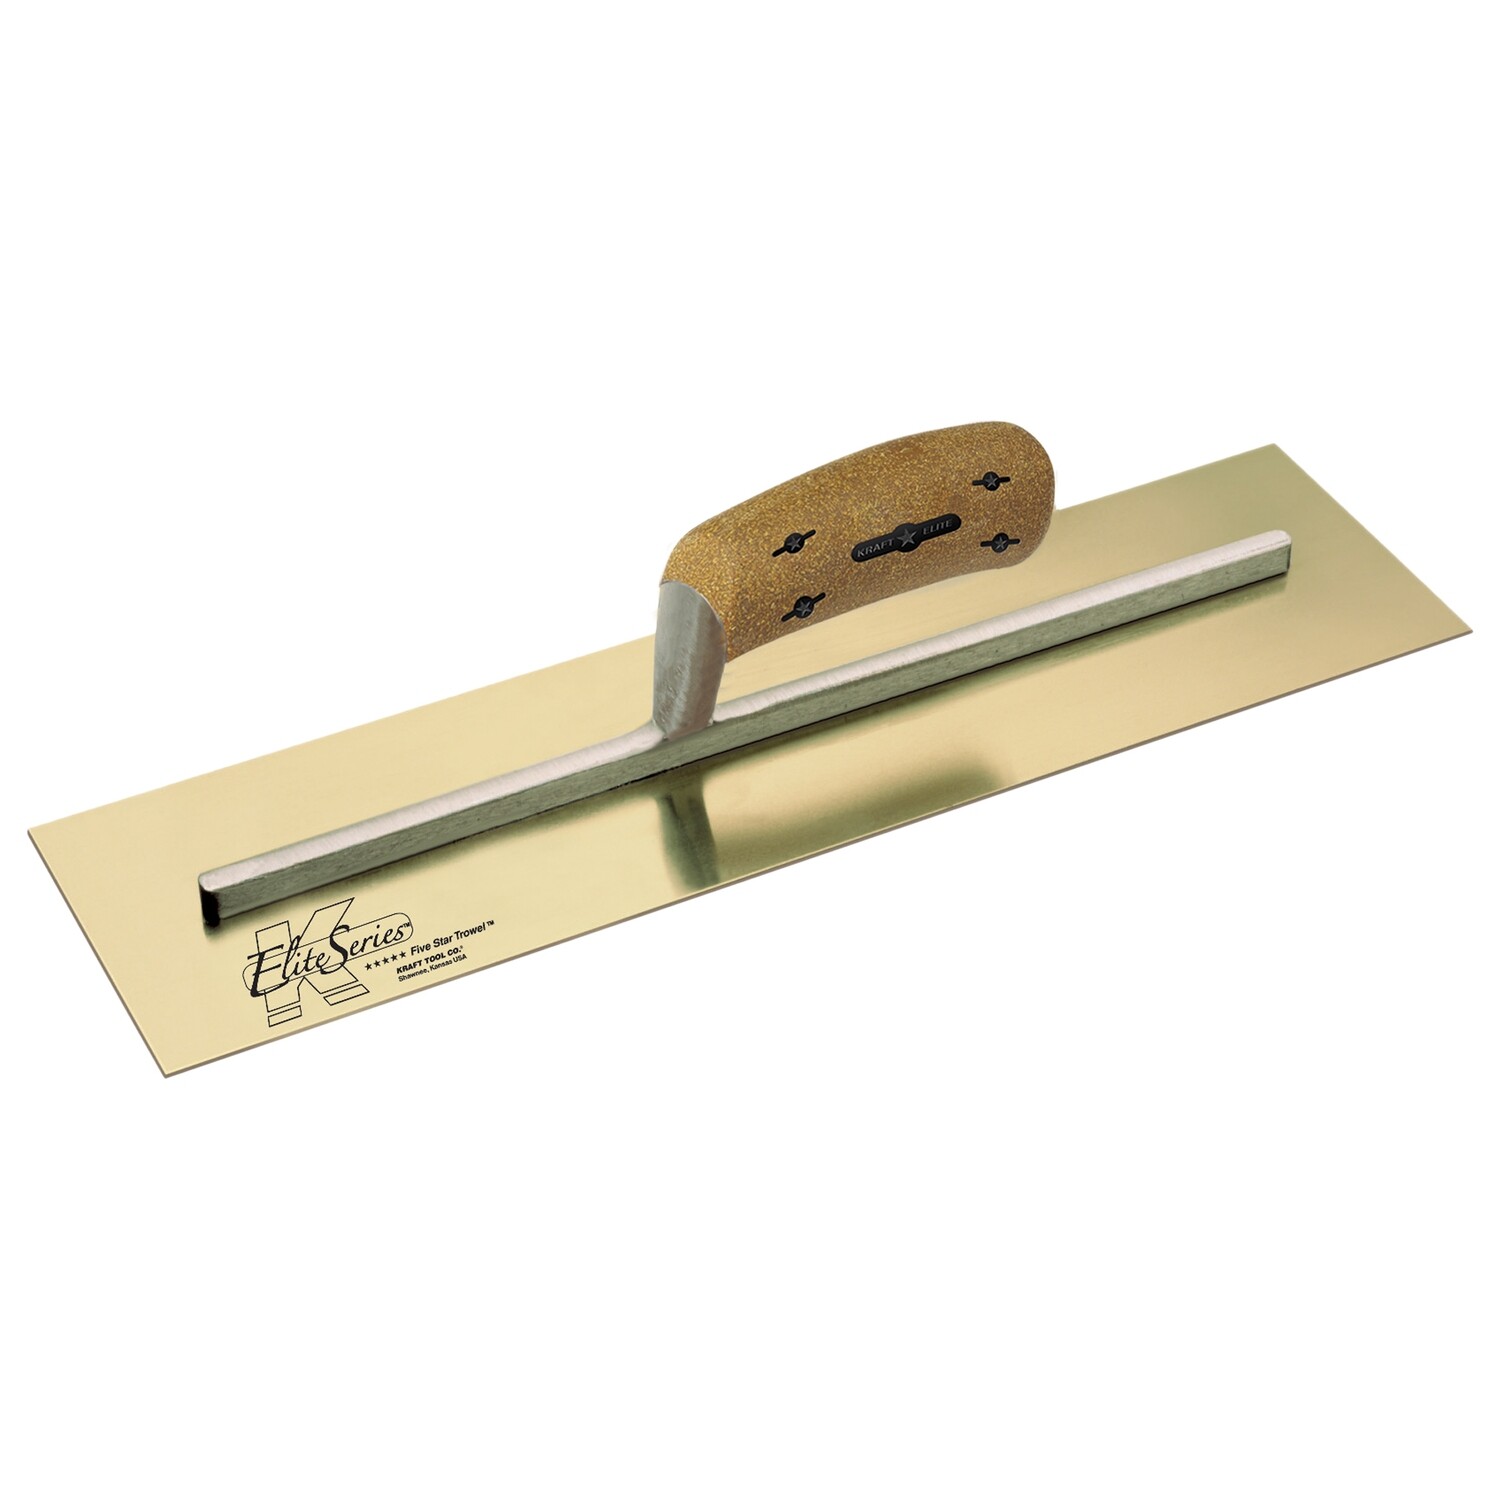 Kraft CFE545 Elite Series Five Star 16" x 5" Golden Stainless Steel Cement Trowel with Laminated Wood Handle Pack of 6